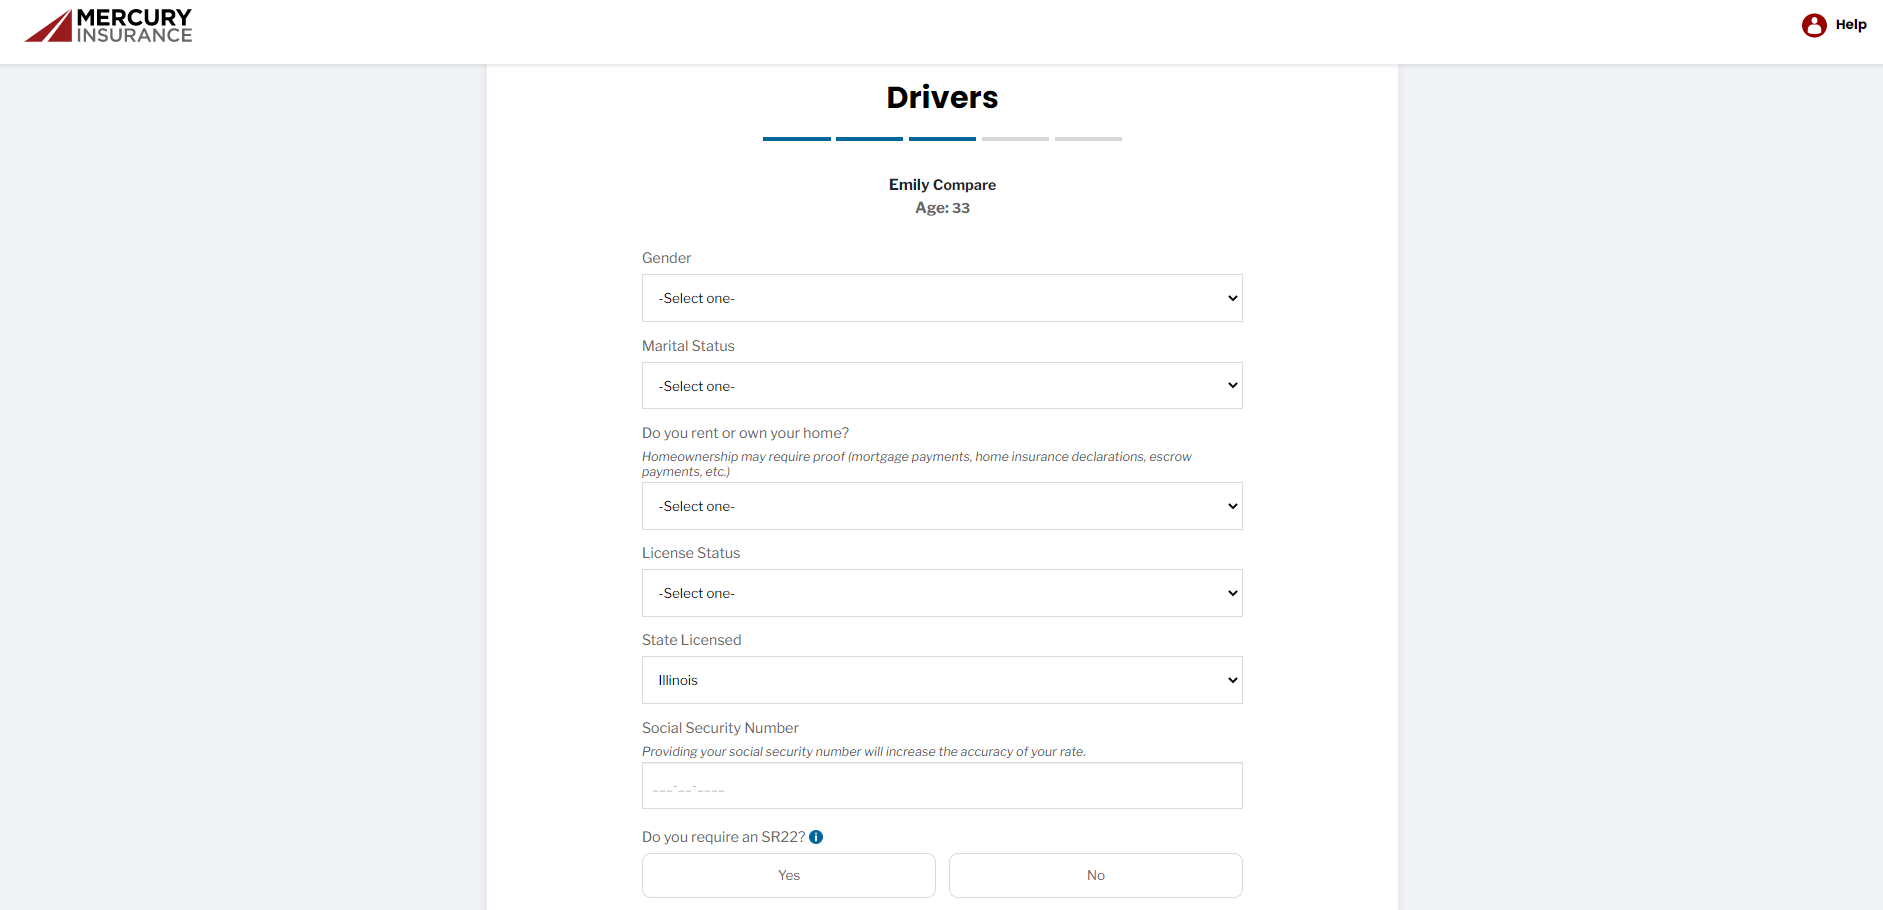 Mercury Insurance quote page requesting additional driver information, such as gender, marital status, housing status, license status, and Social Security number